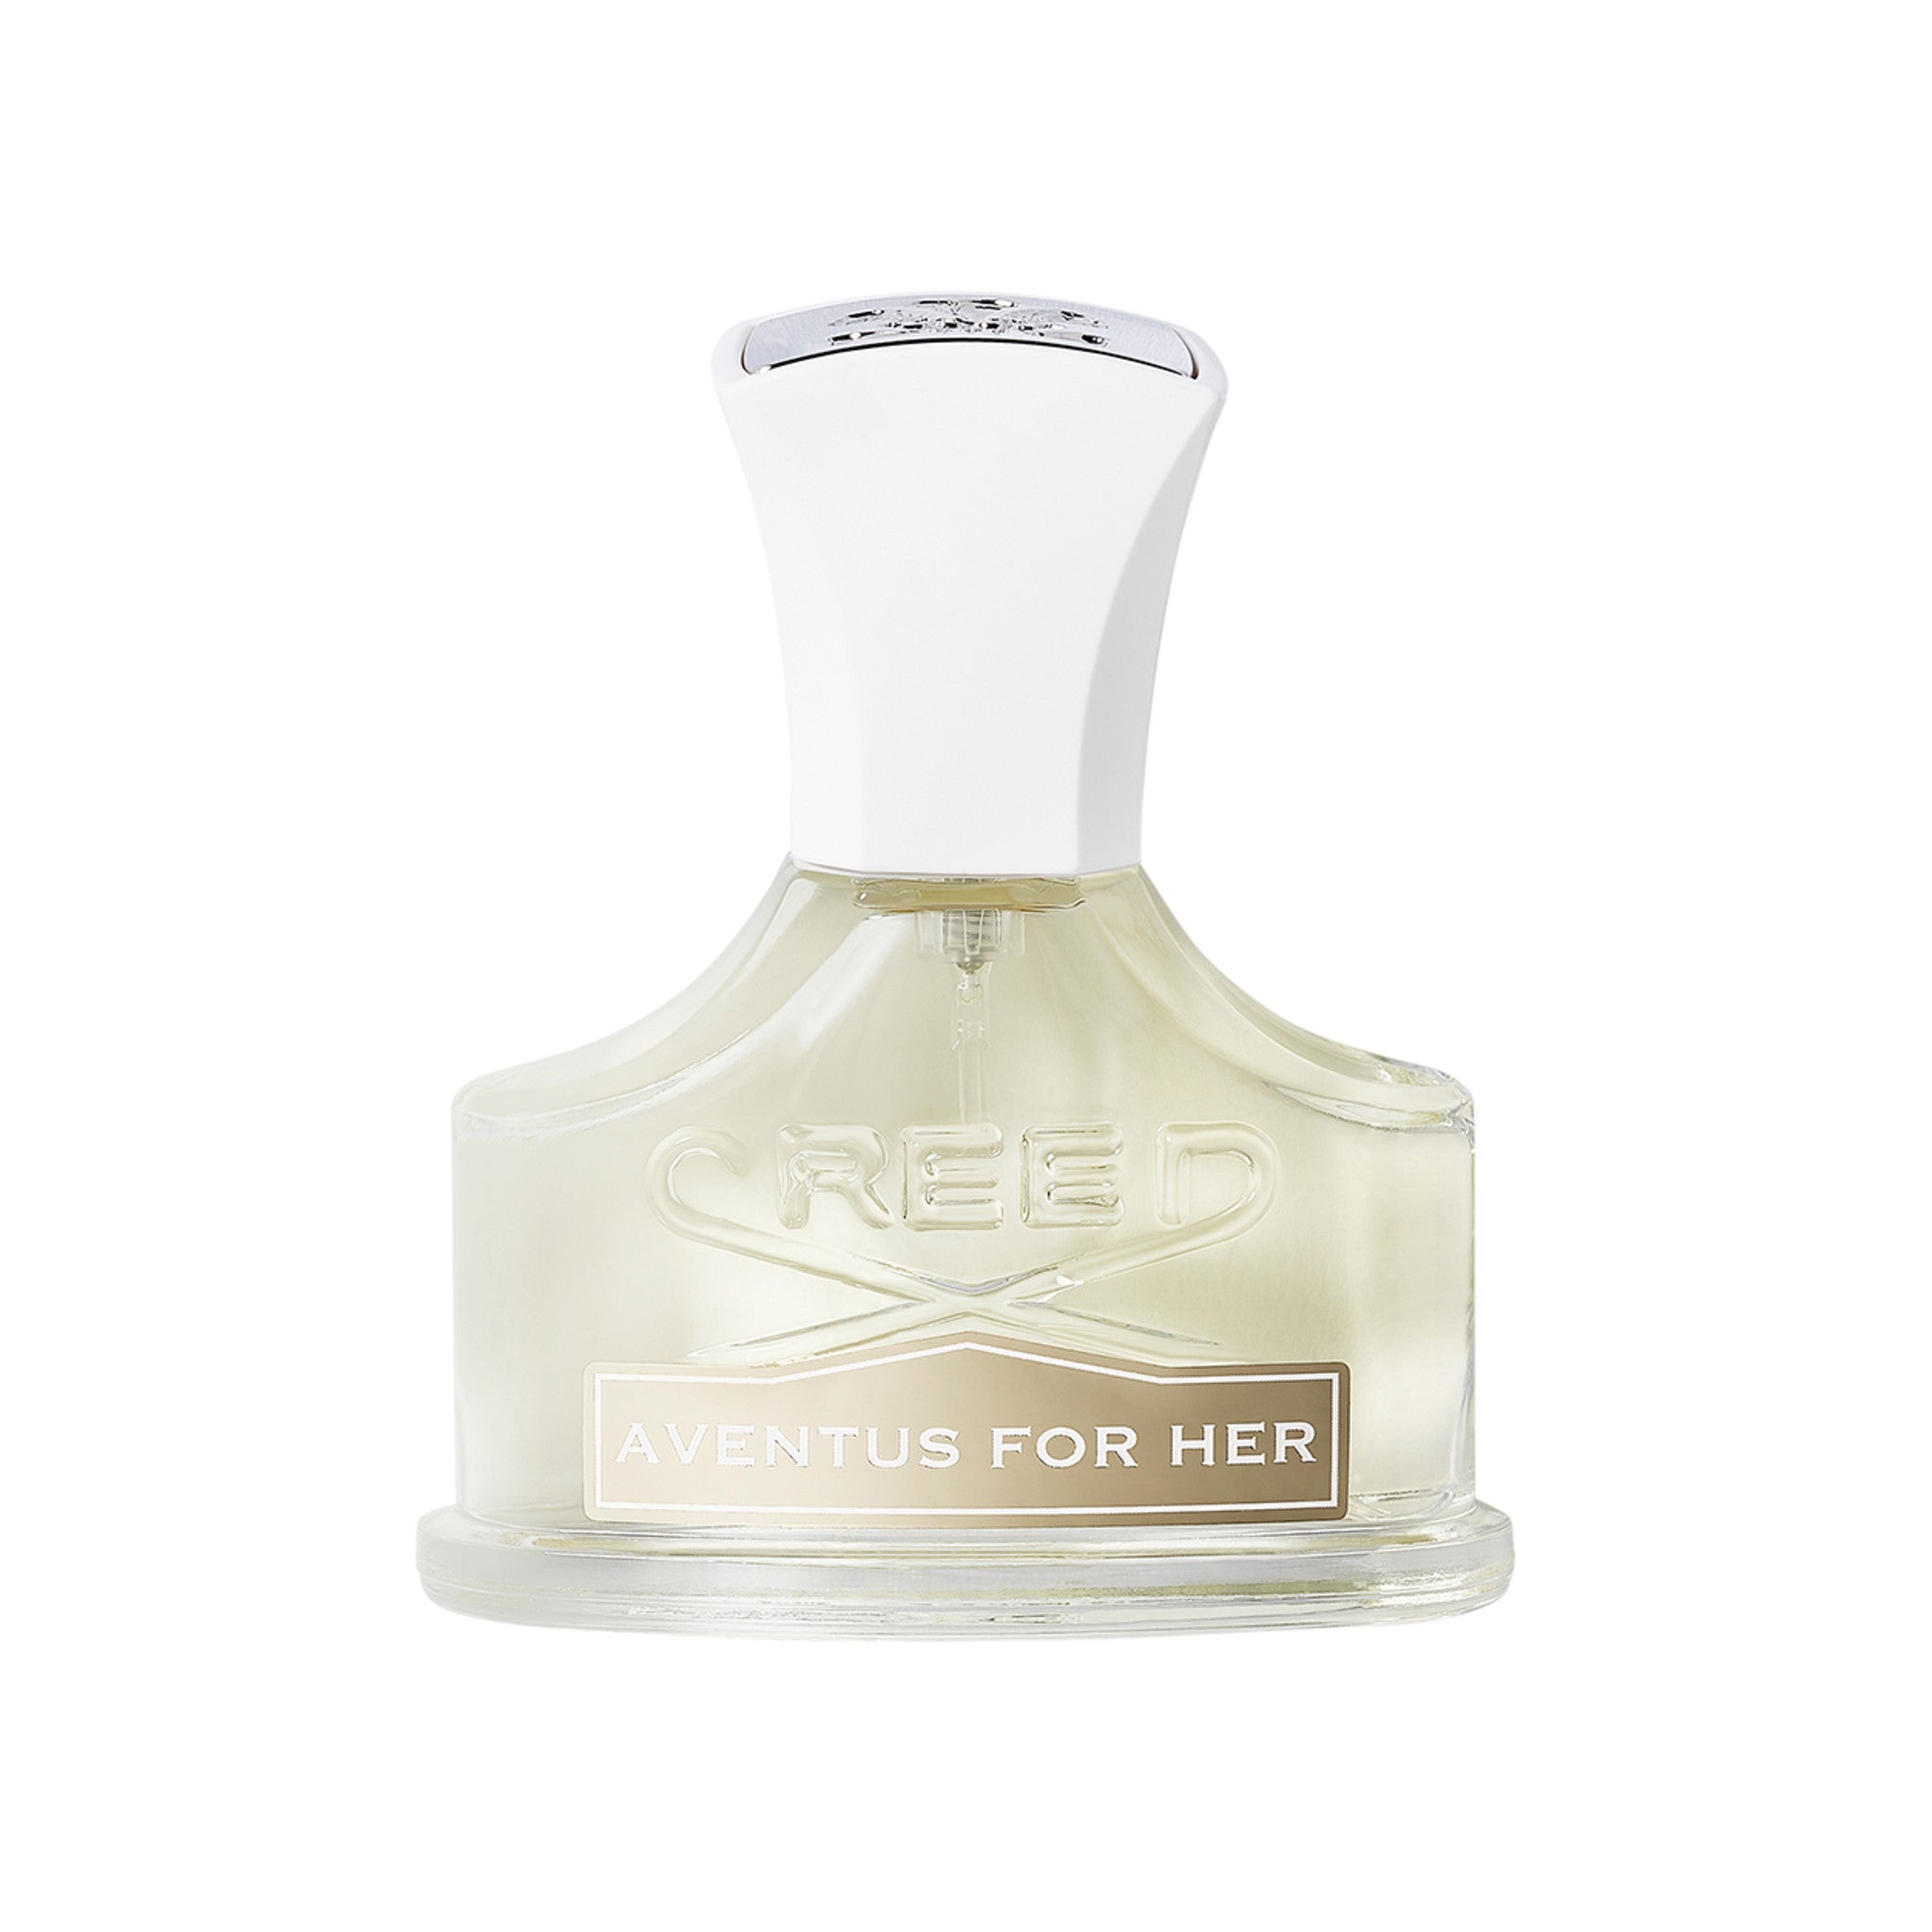 Creed Aventus For Her Size variant: 1.01 fl oz main image.